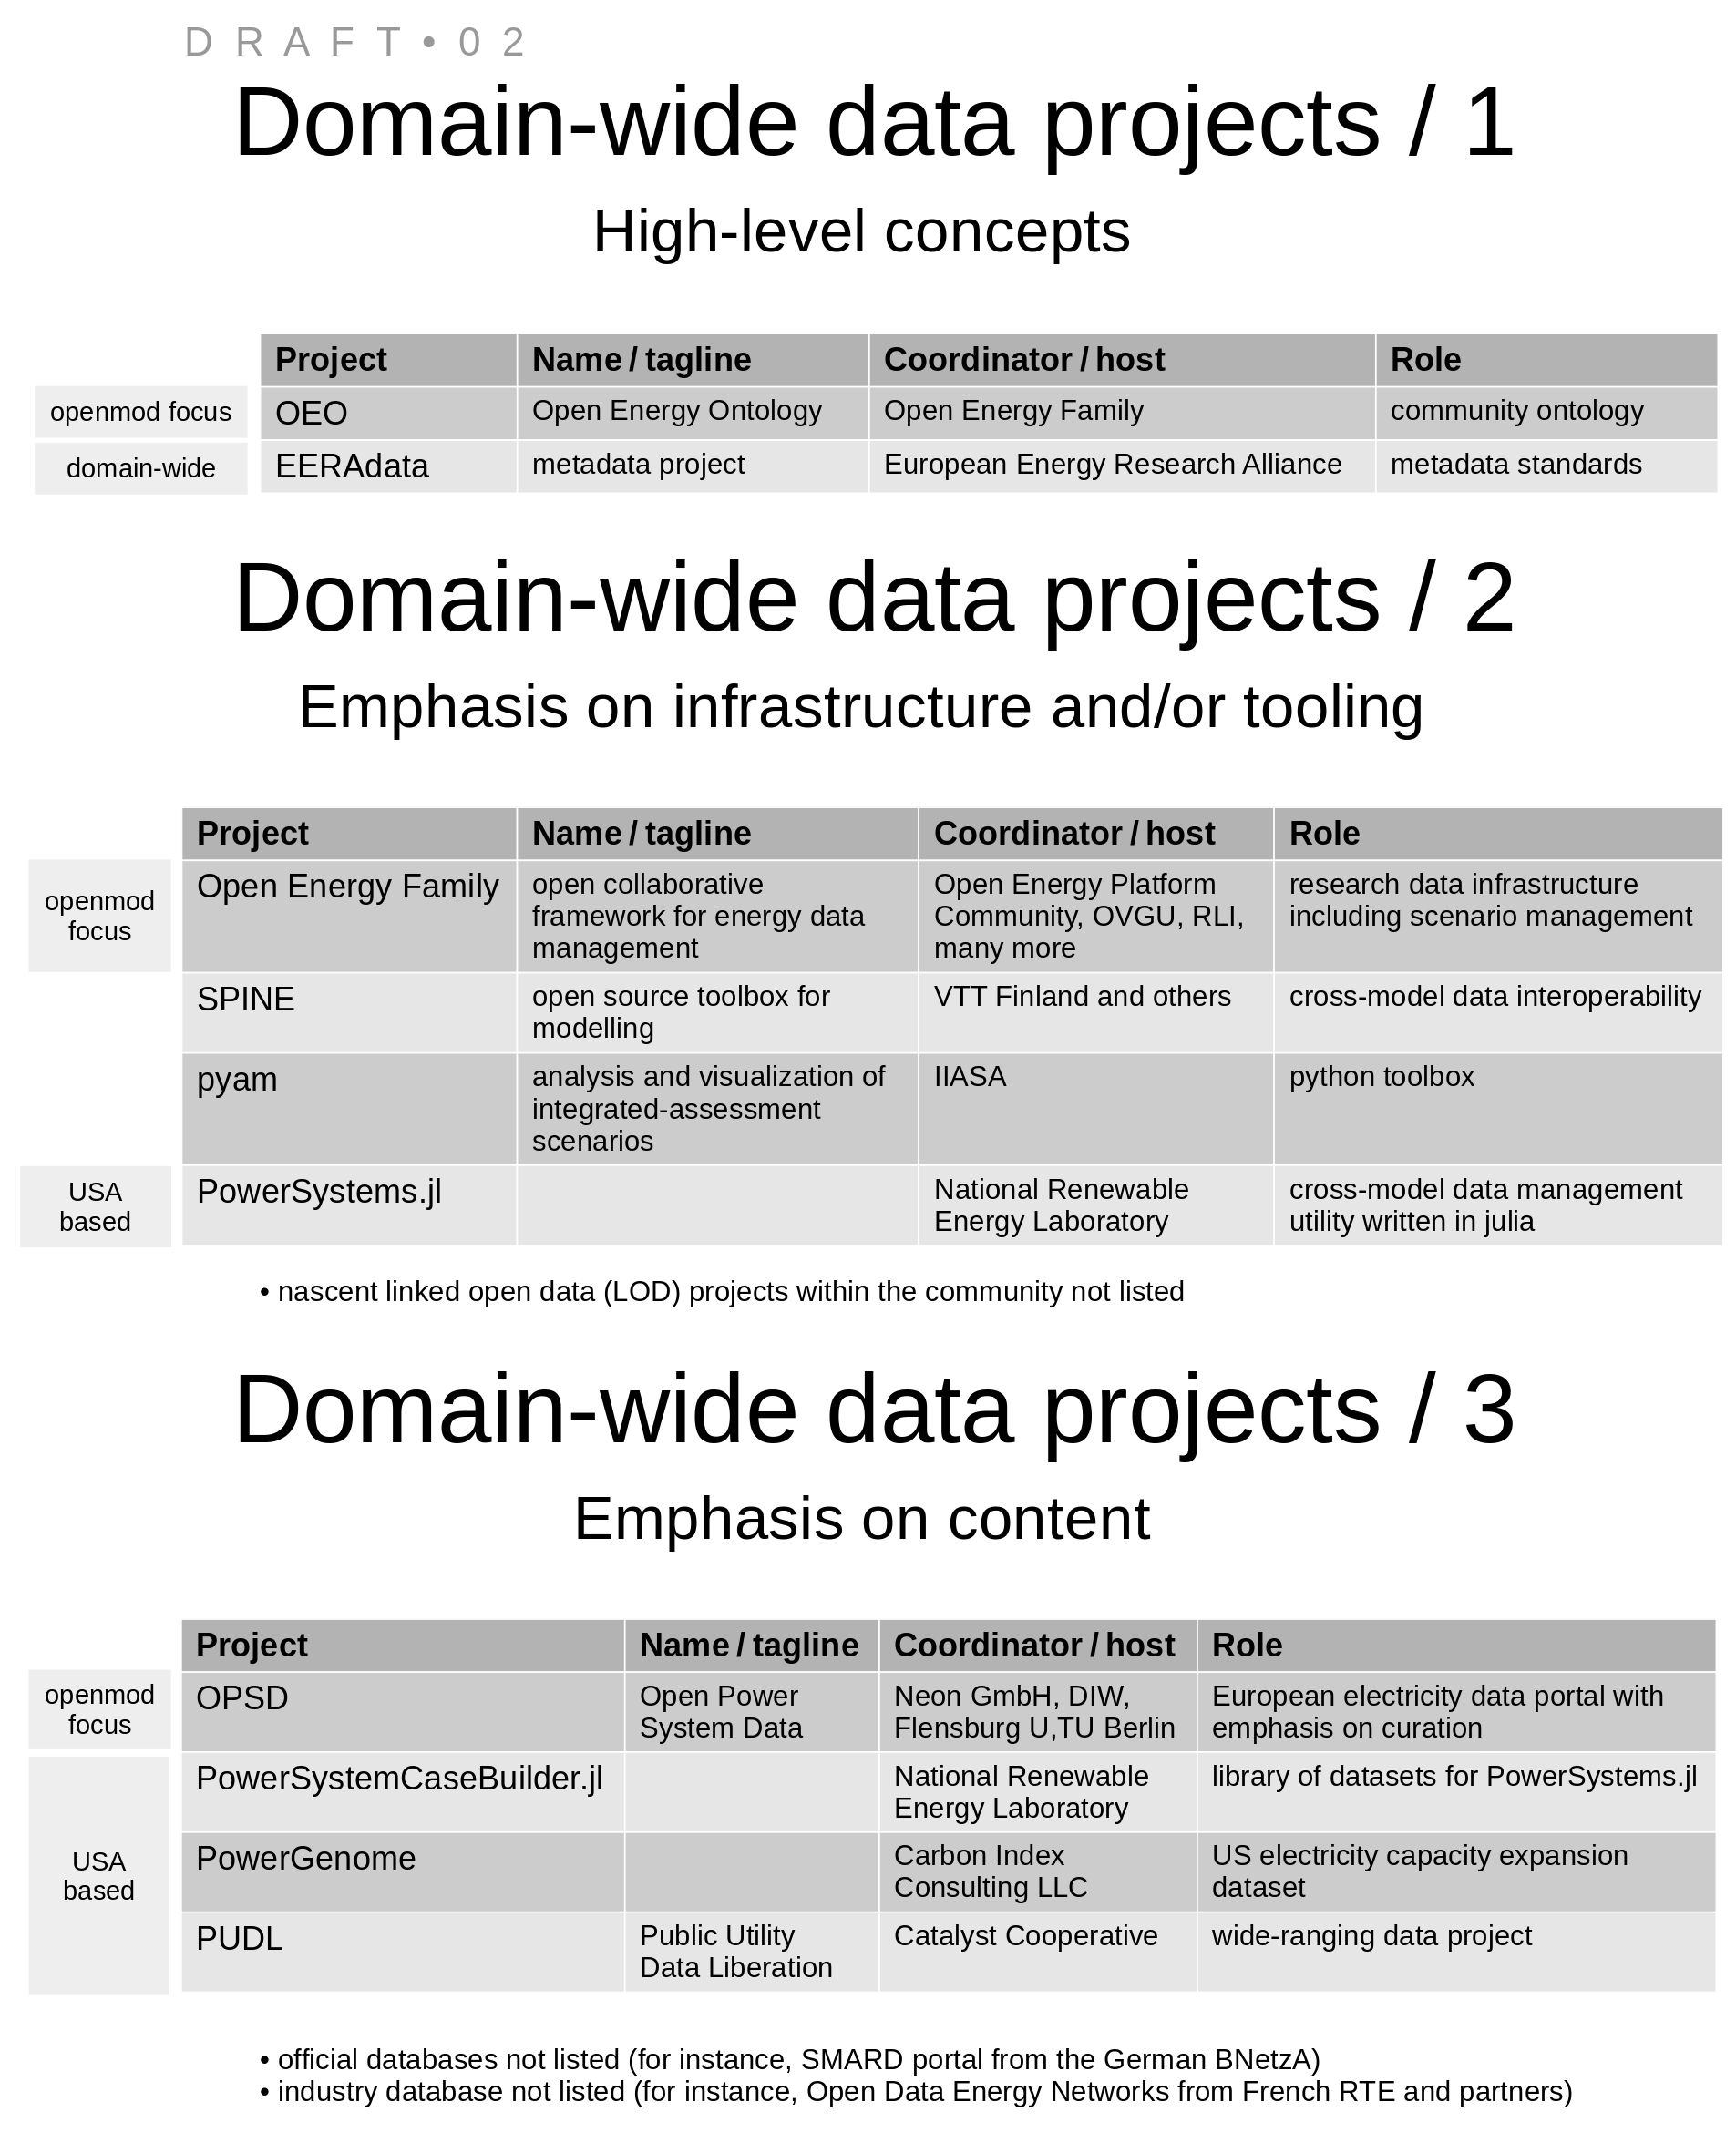 [domain-wide-data-projects-draft-02]